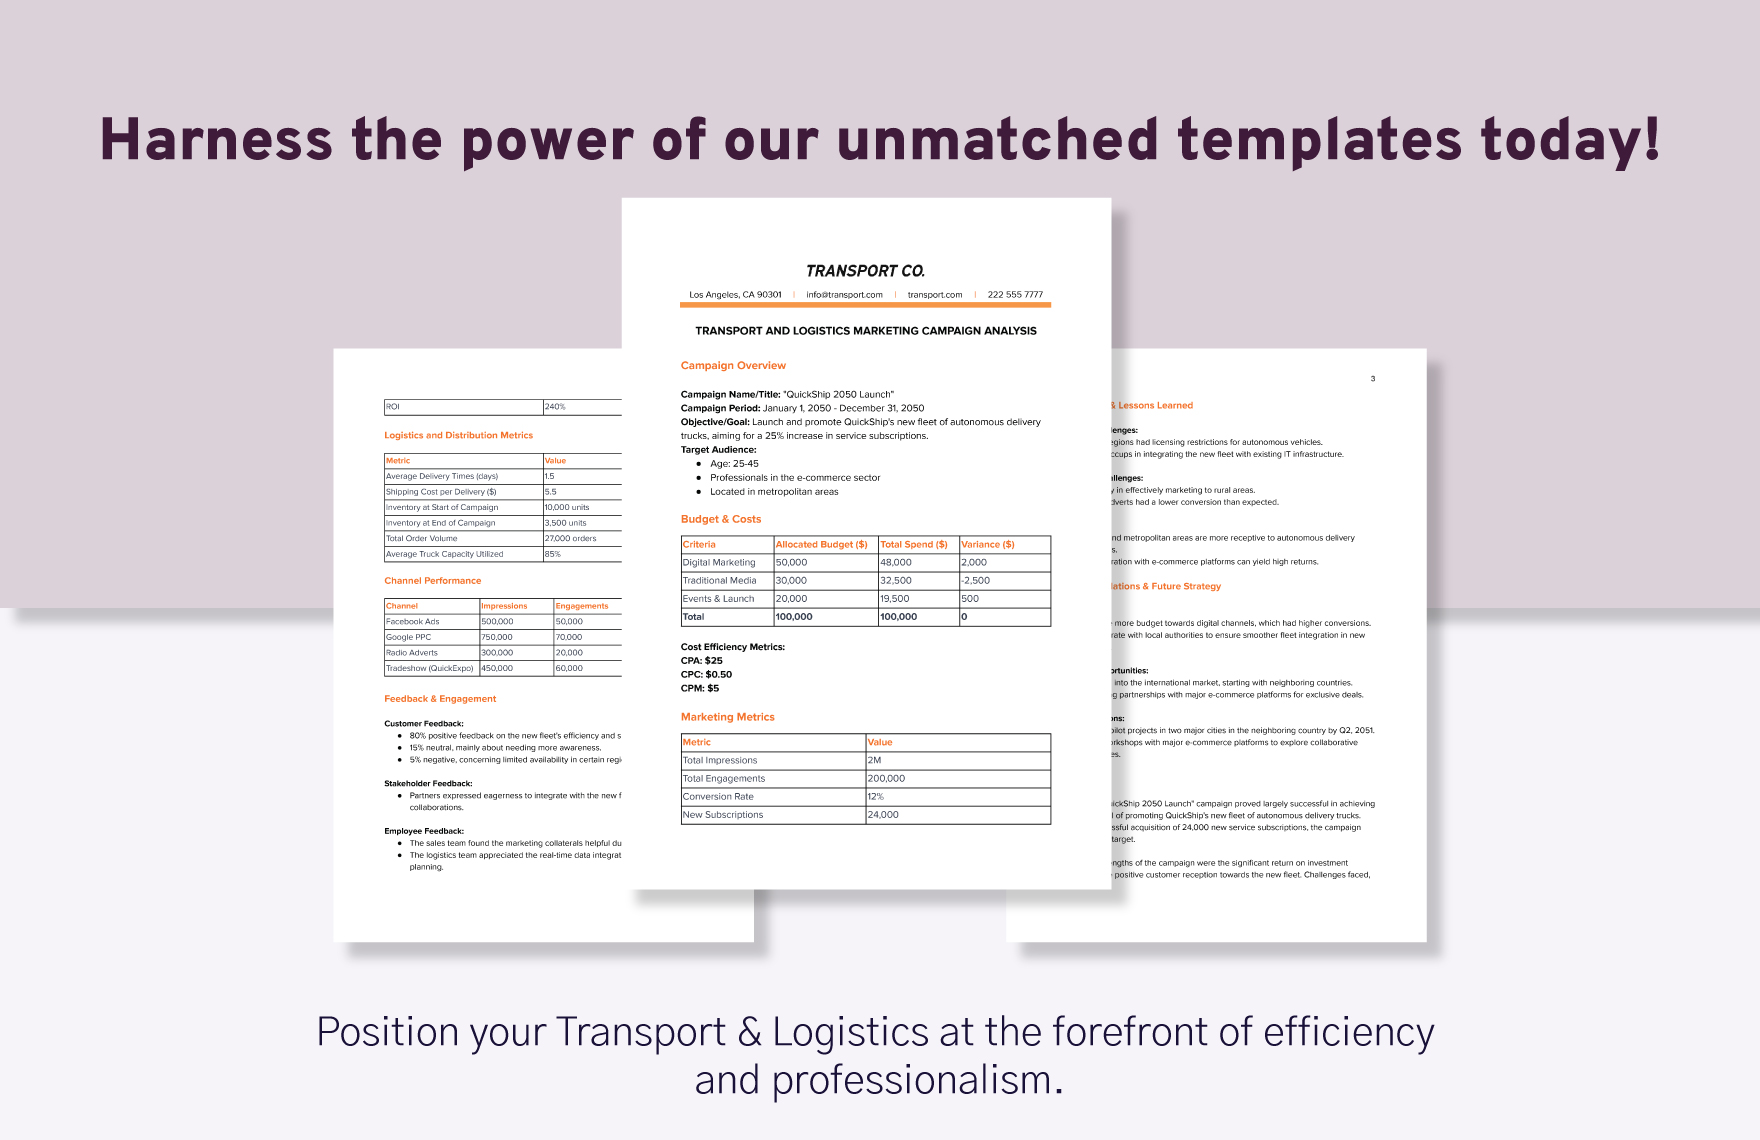 Transport and Logistics Marketing Campaign Analysis Template